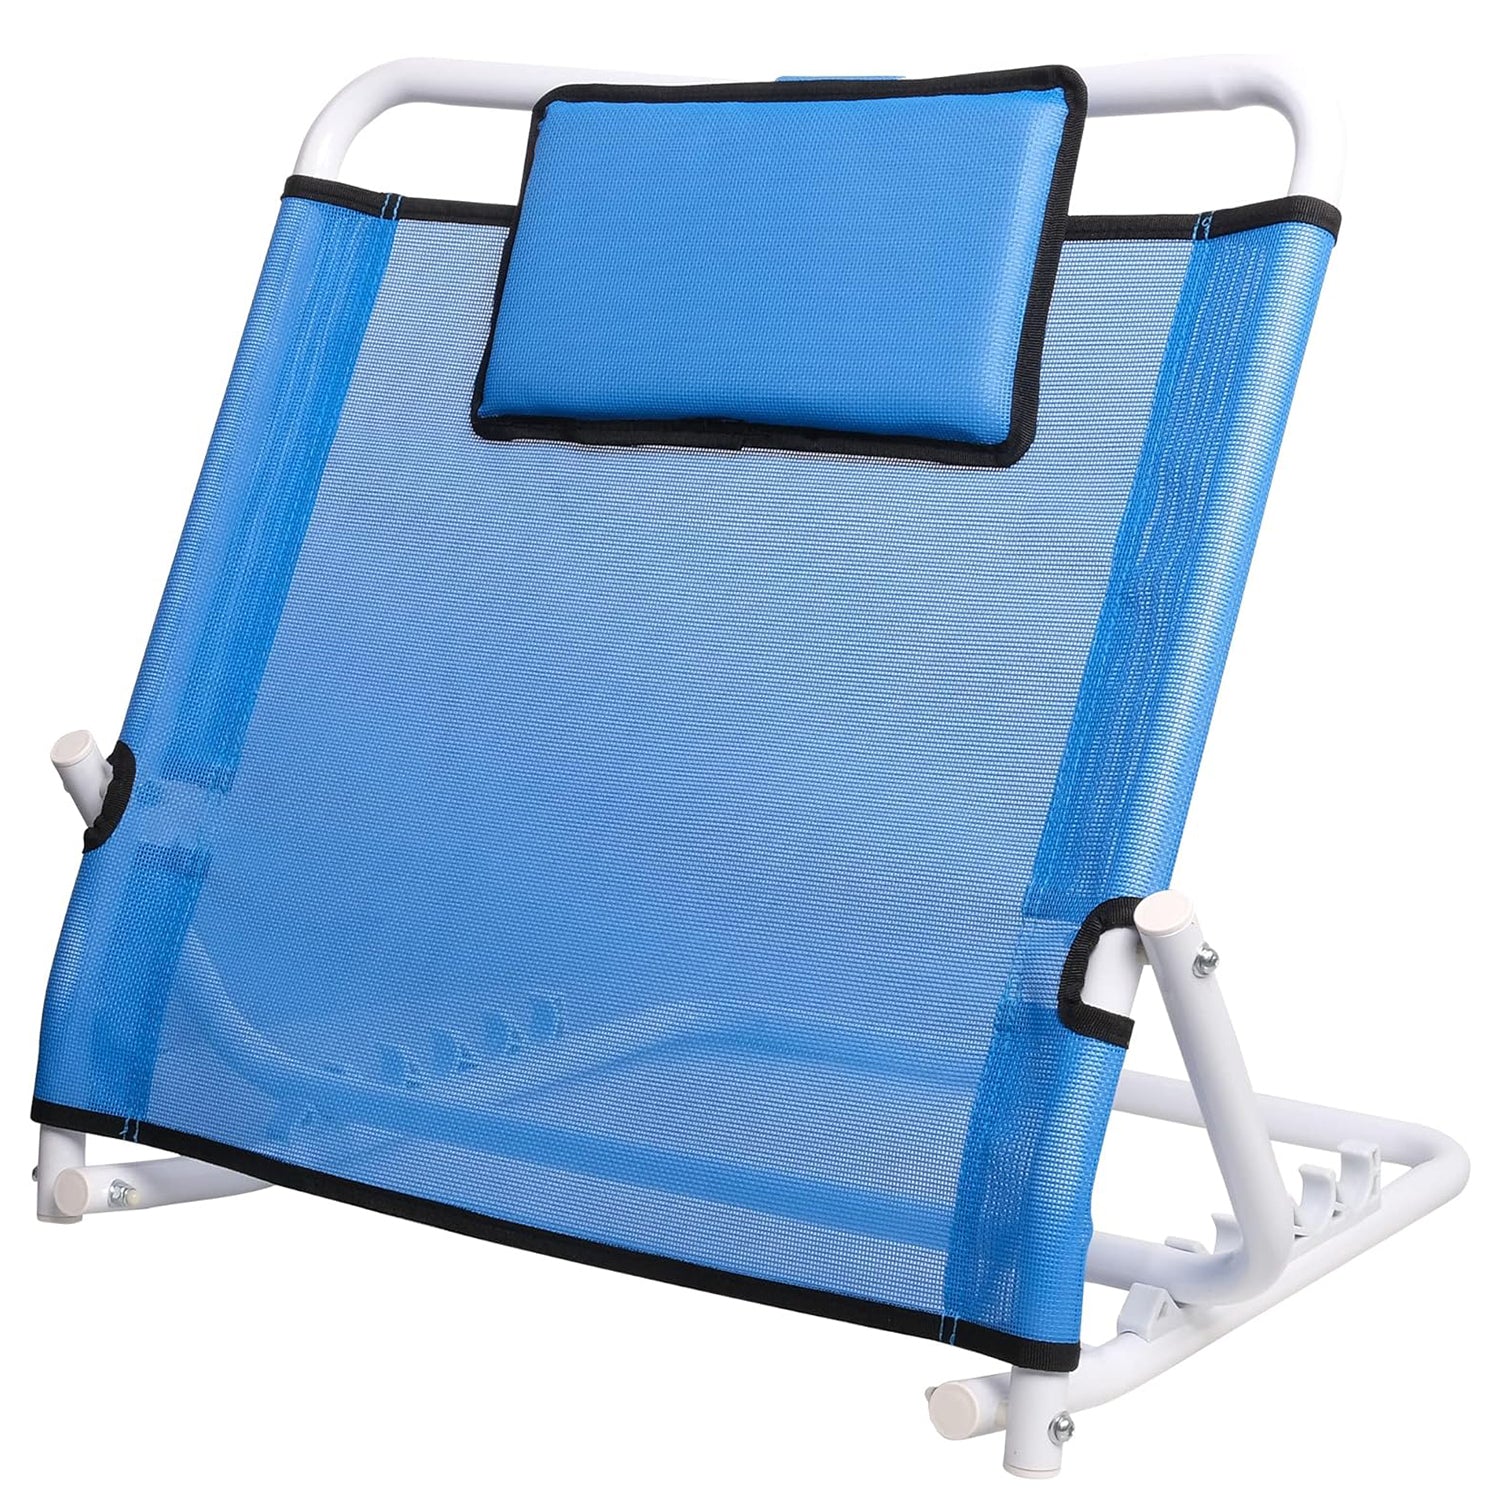 Portable Folding Lifting Bed Backrest with Head Pillow, Reading Bed Rest Pillows, Adjustable Sit-Up Back Rest